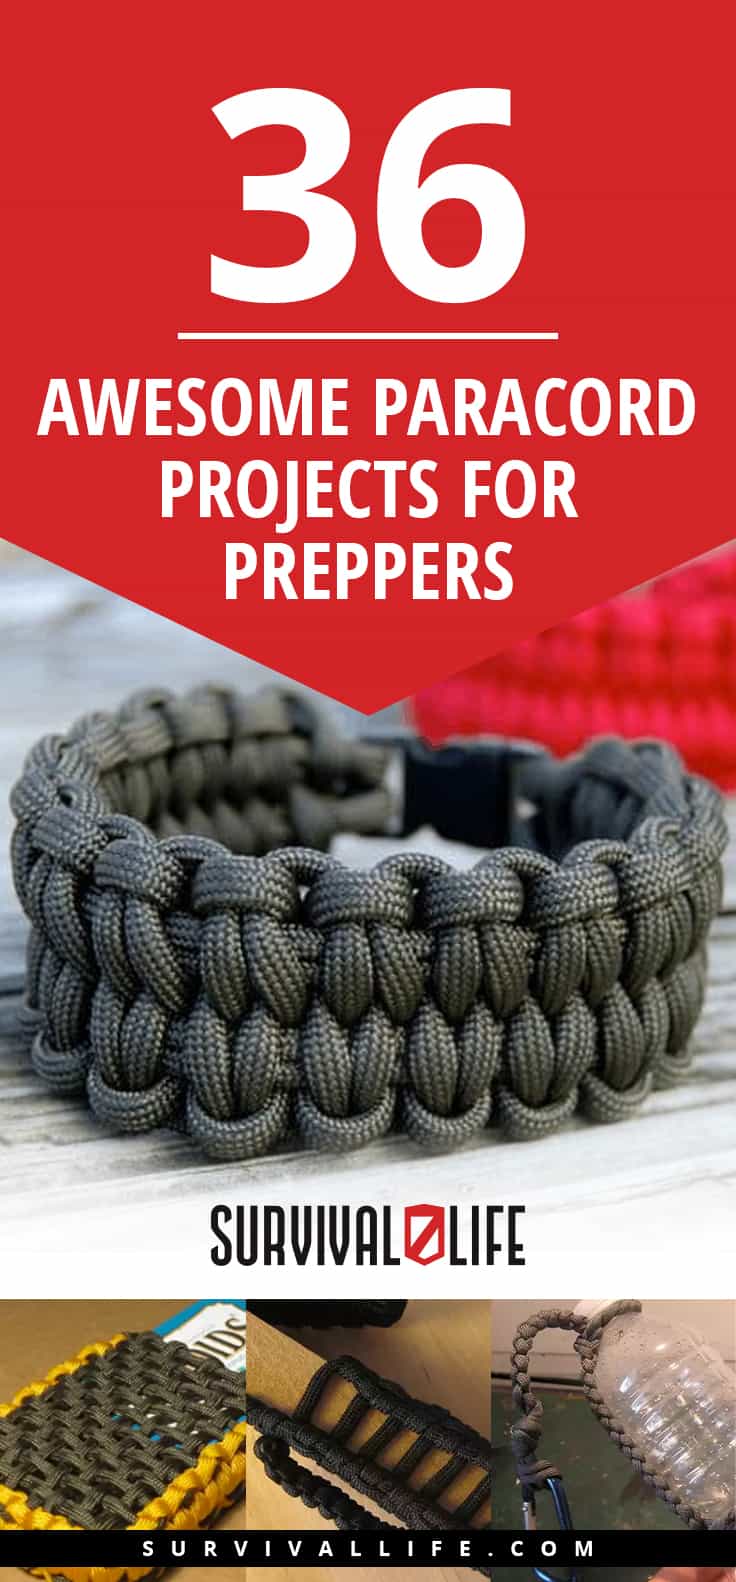 36 Awesome Paracord Projects For Preppers | https://survivallife.com/36-paracord-projects-preppers/